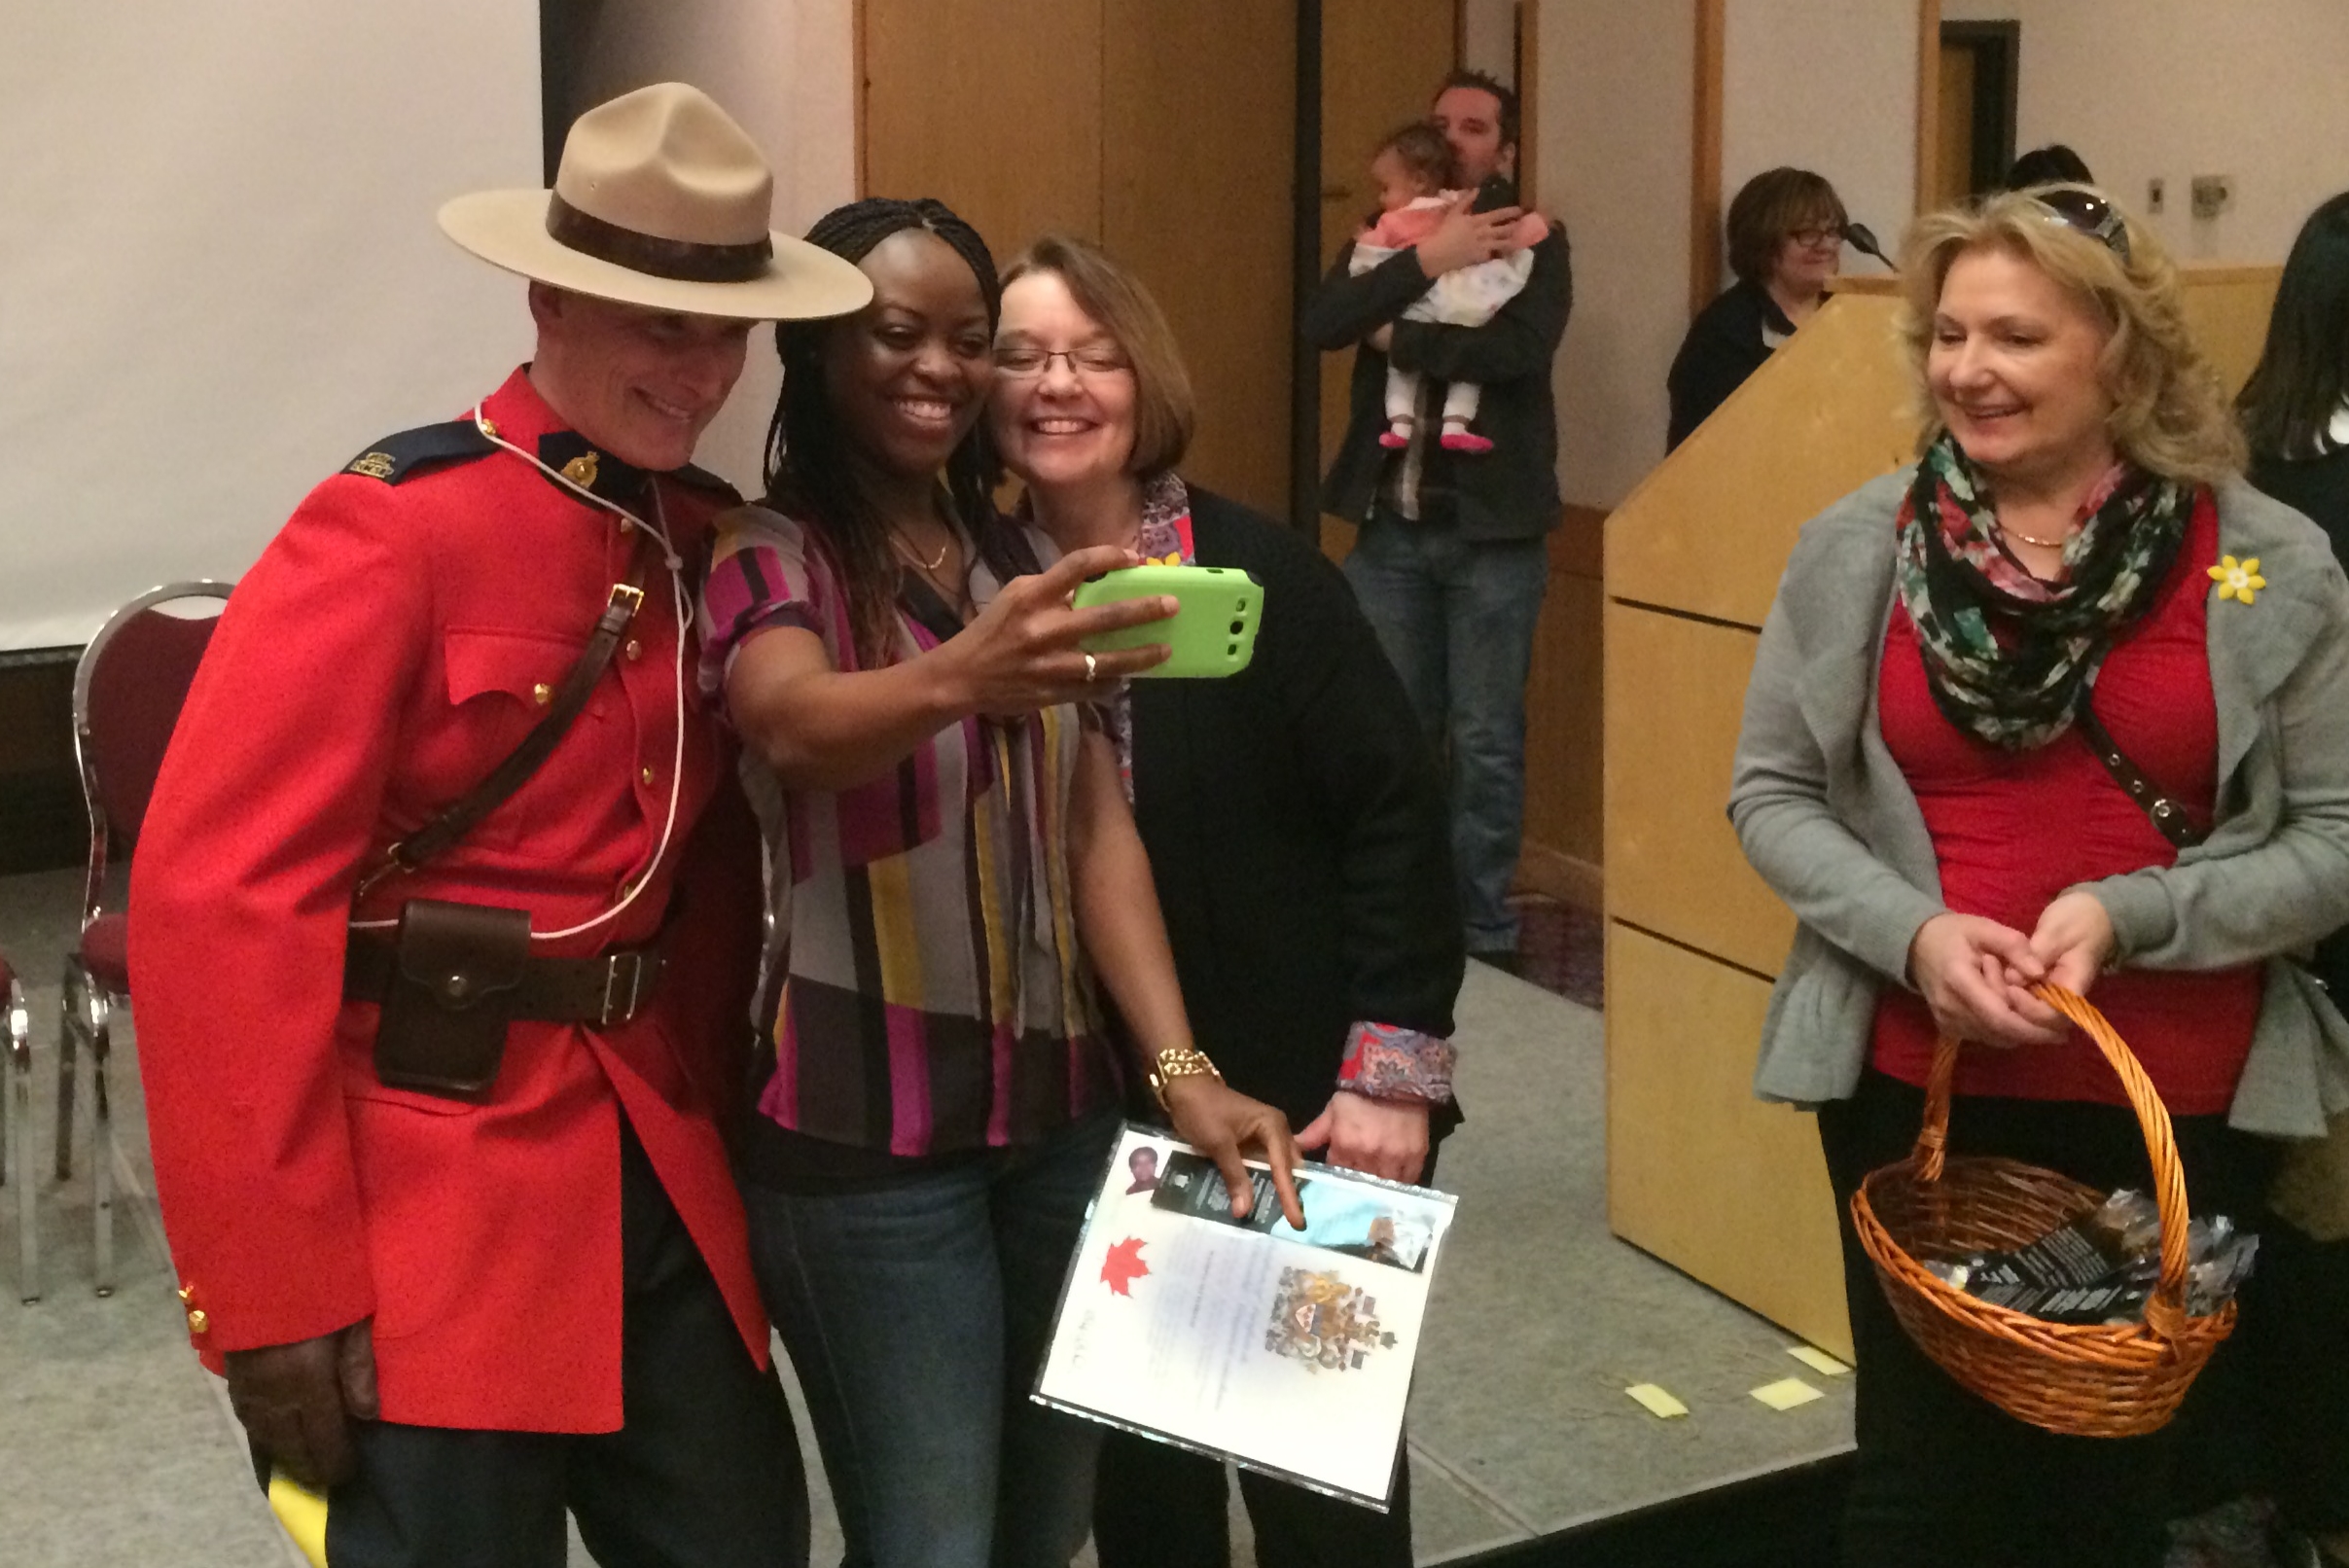 A woman takes a selfie with RCMP officer, others at her citizenship ceremony.